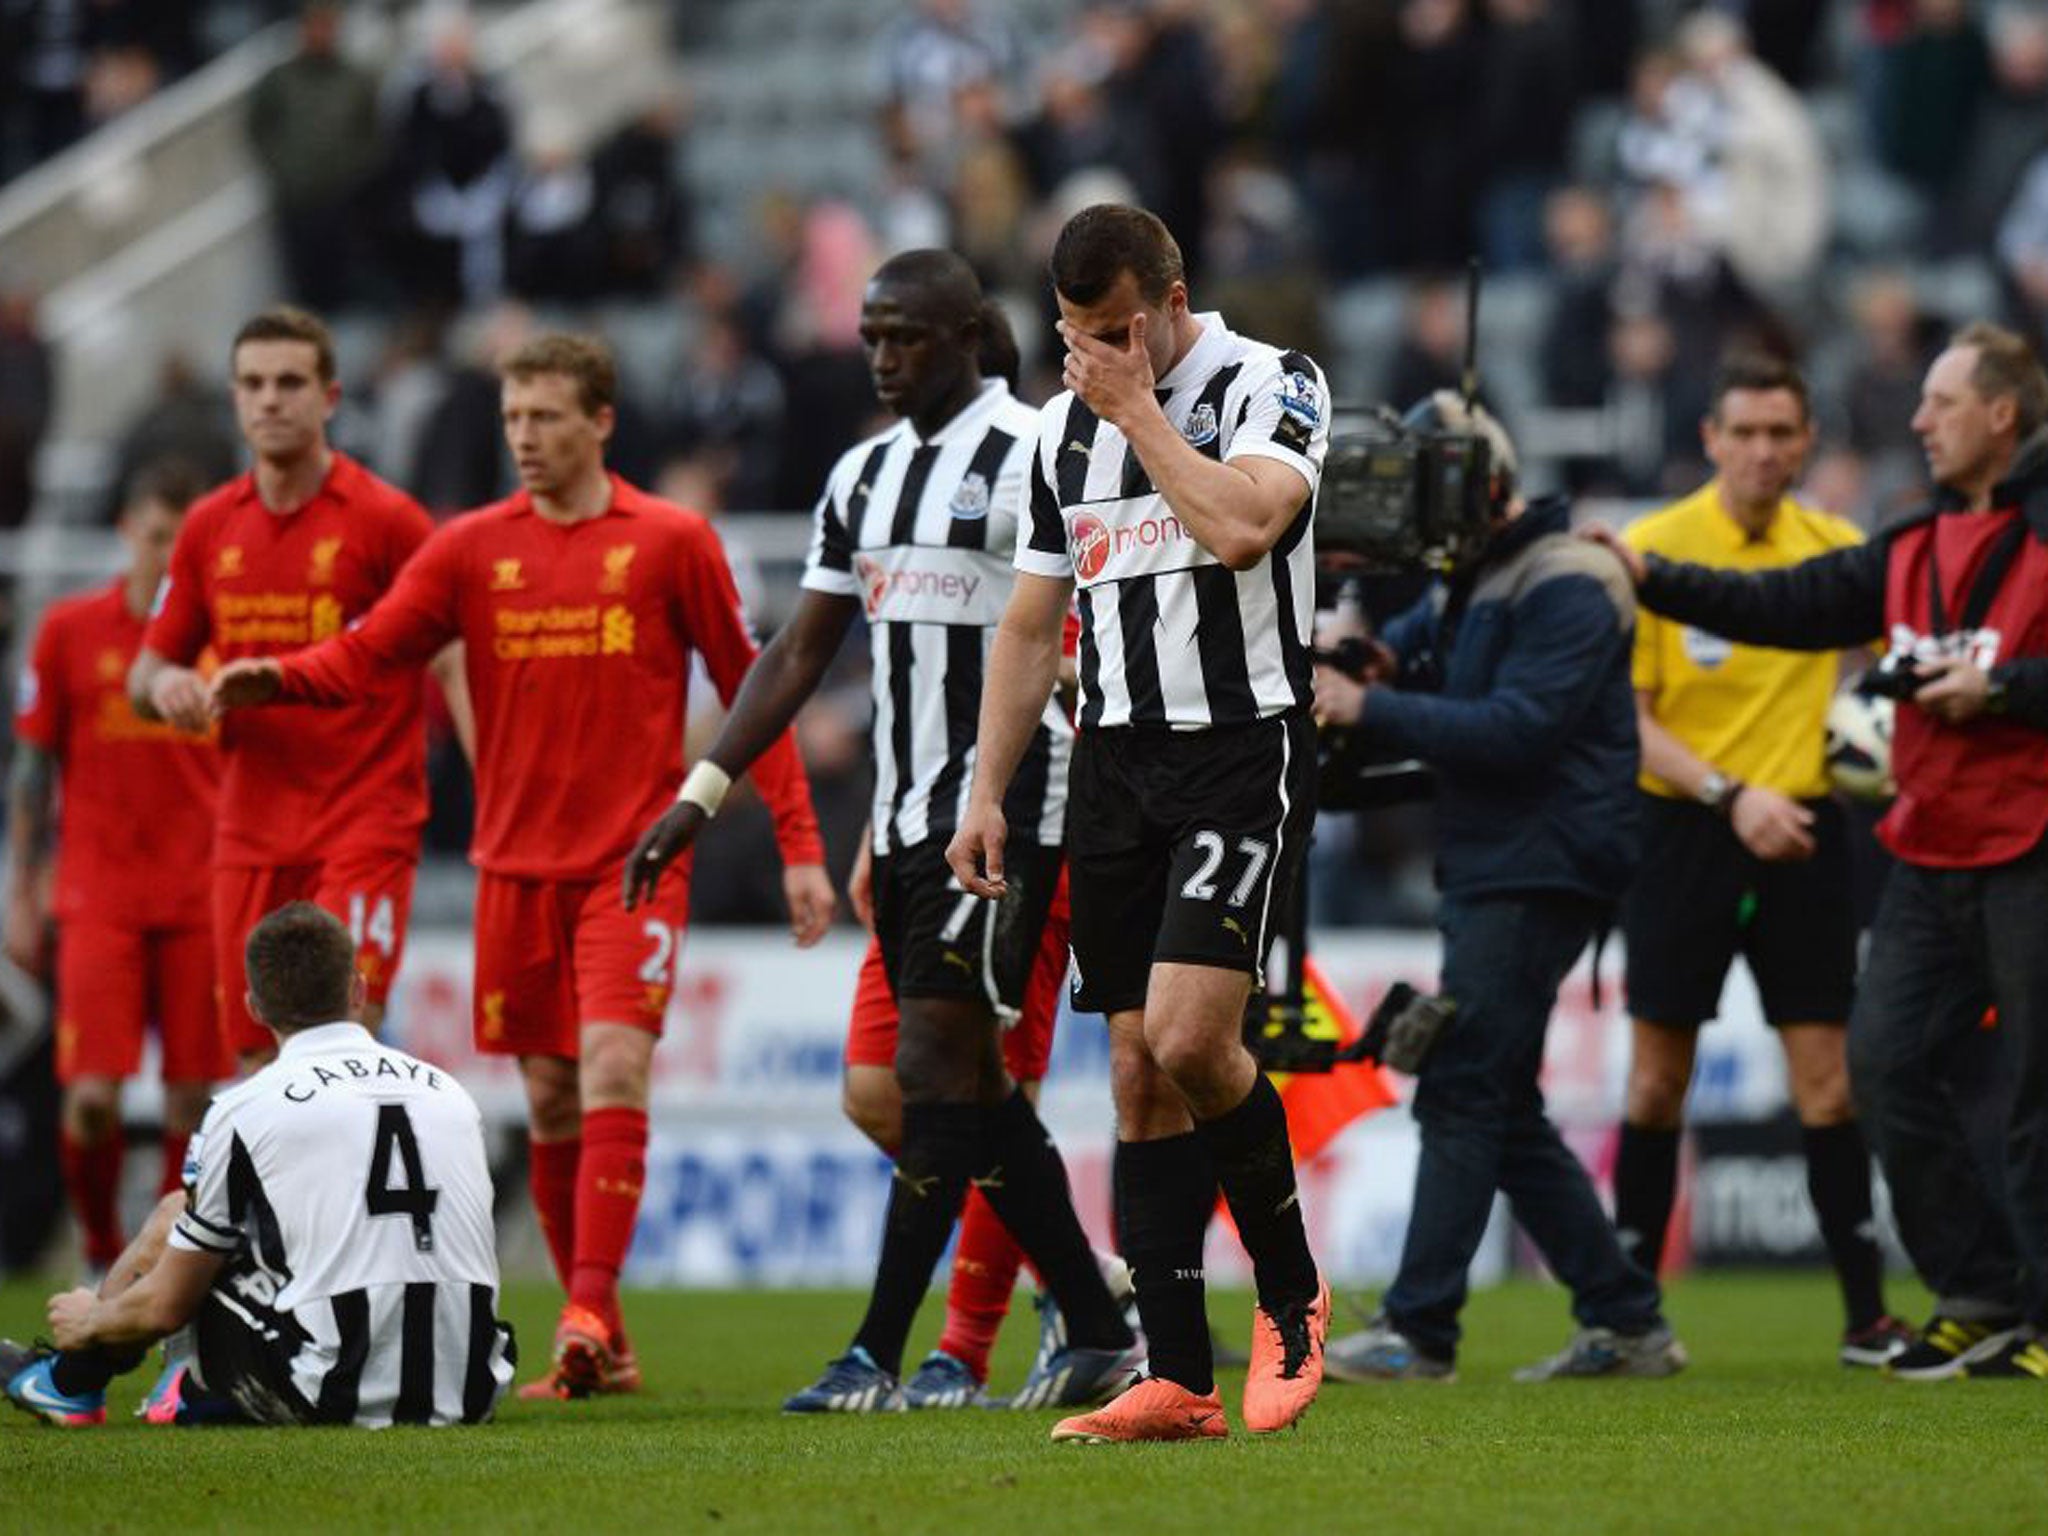 A dejected Steven Taylor after Saturday’s match at St James’ Park